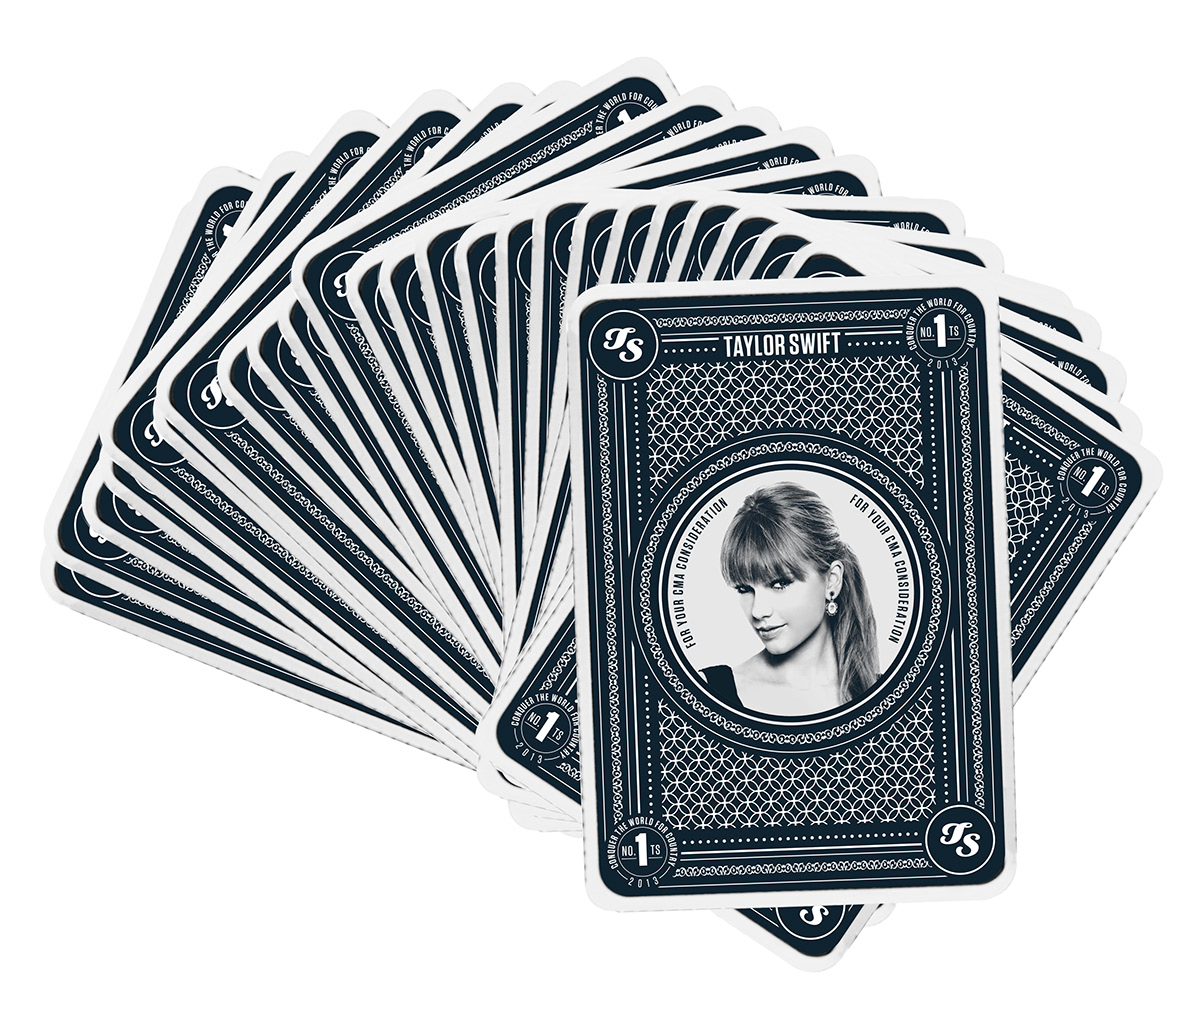 taylor swift Amy Fucci big machine records CMA Playing Cards card game cards Promotional Item promo promotional piece leave behind piece Nashville